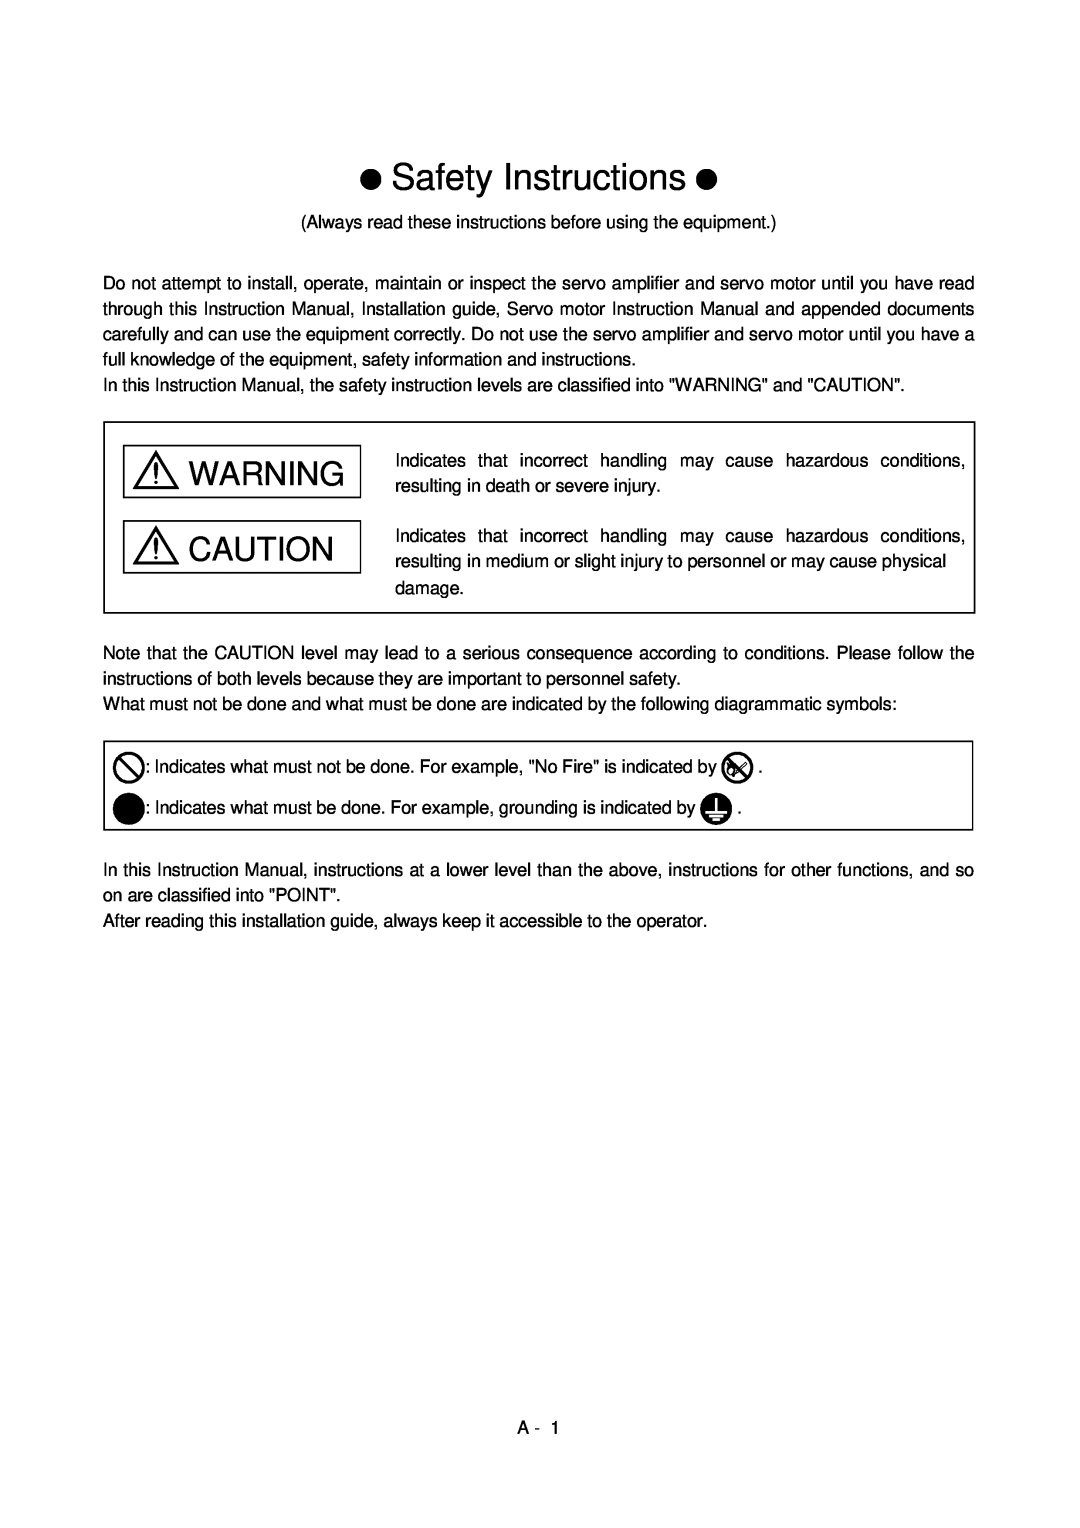 Mitsubishi Electronics MR-J2S- CL specifications Safety Instructions, Warning Caution 